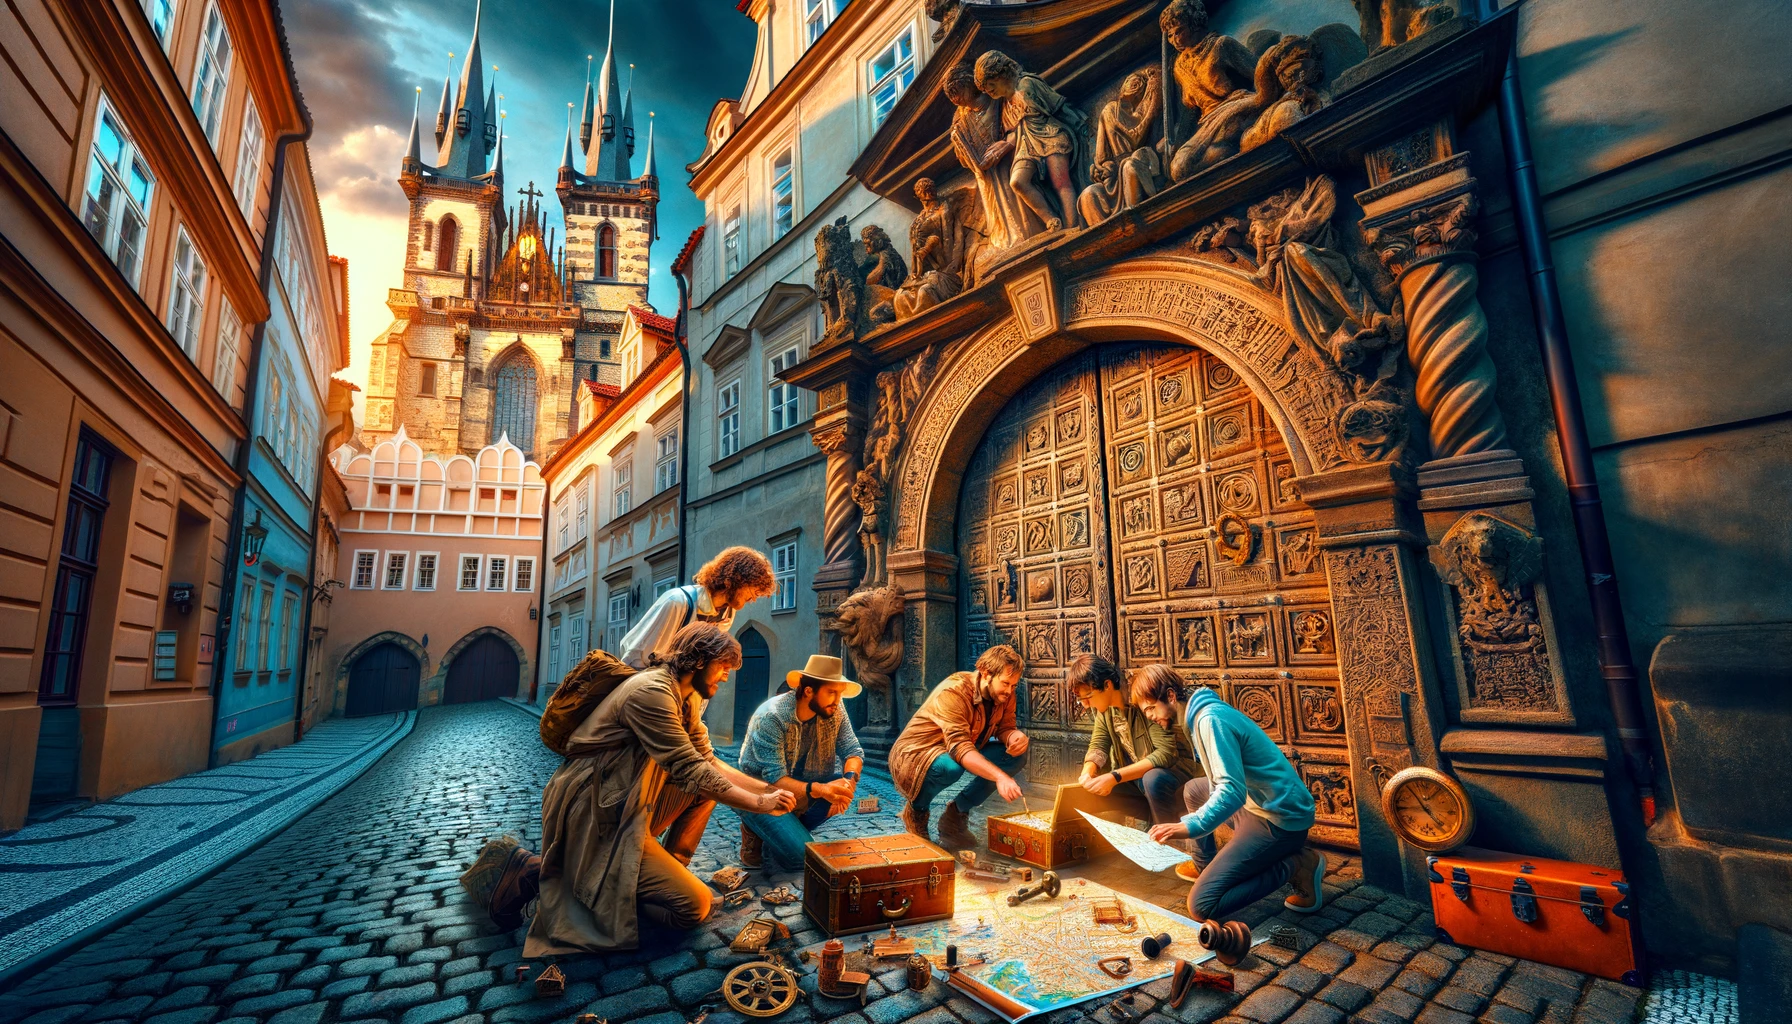 A group of young people playing an outdoor escape game in the streets of Prague.